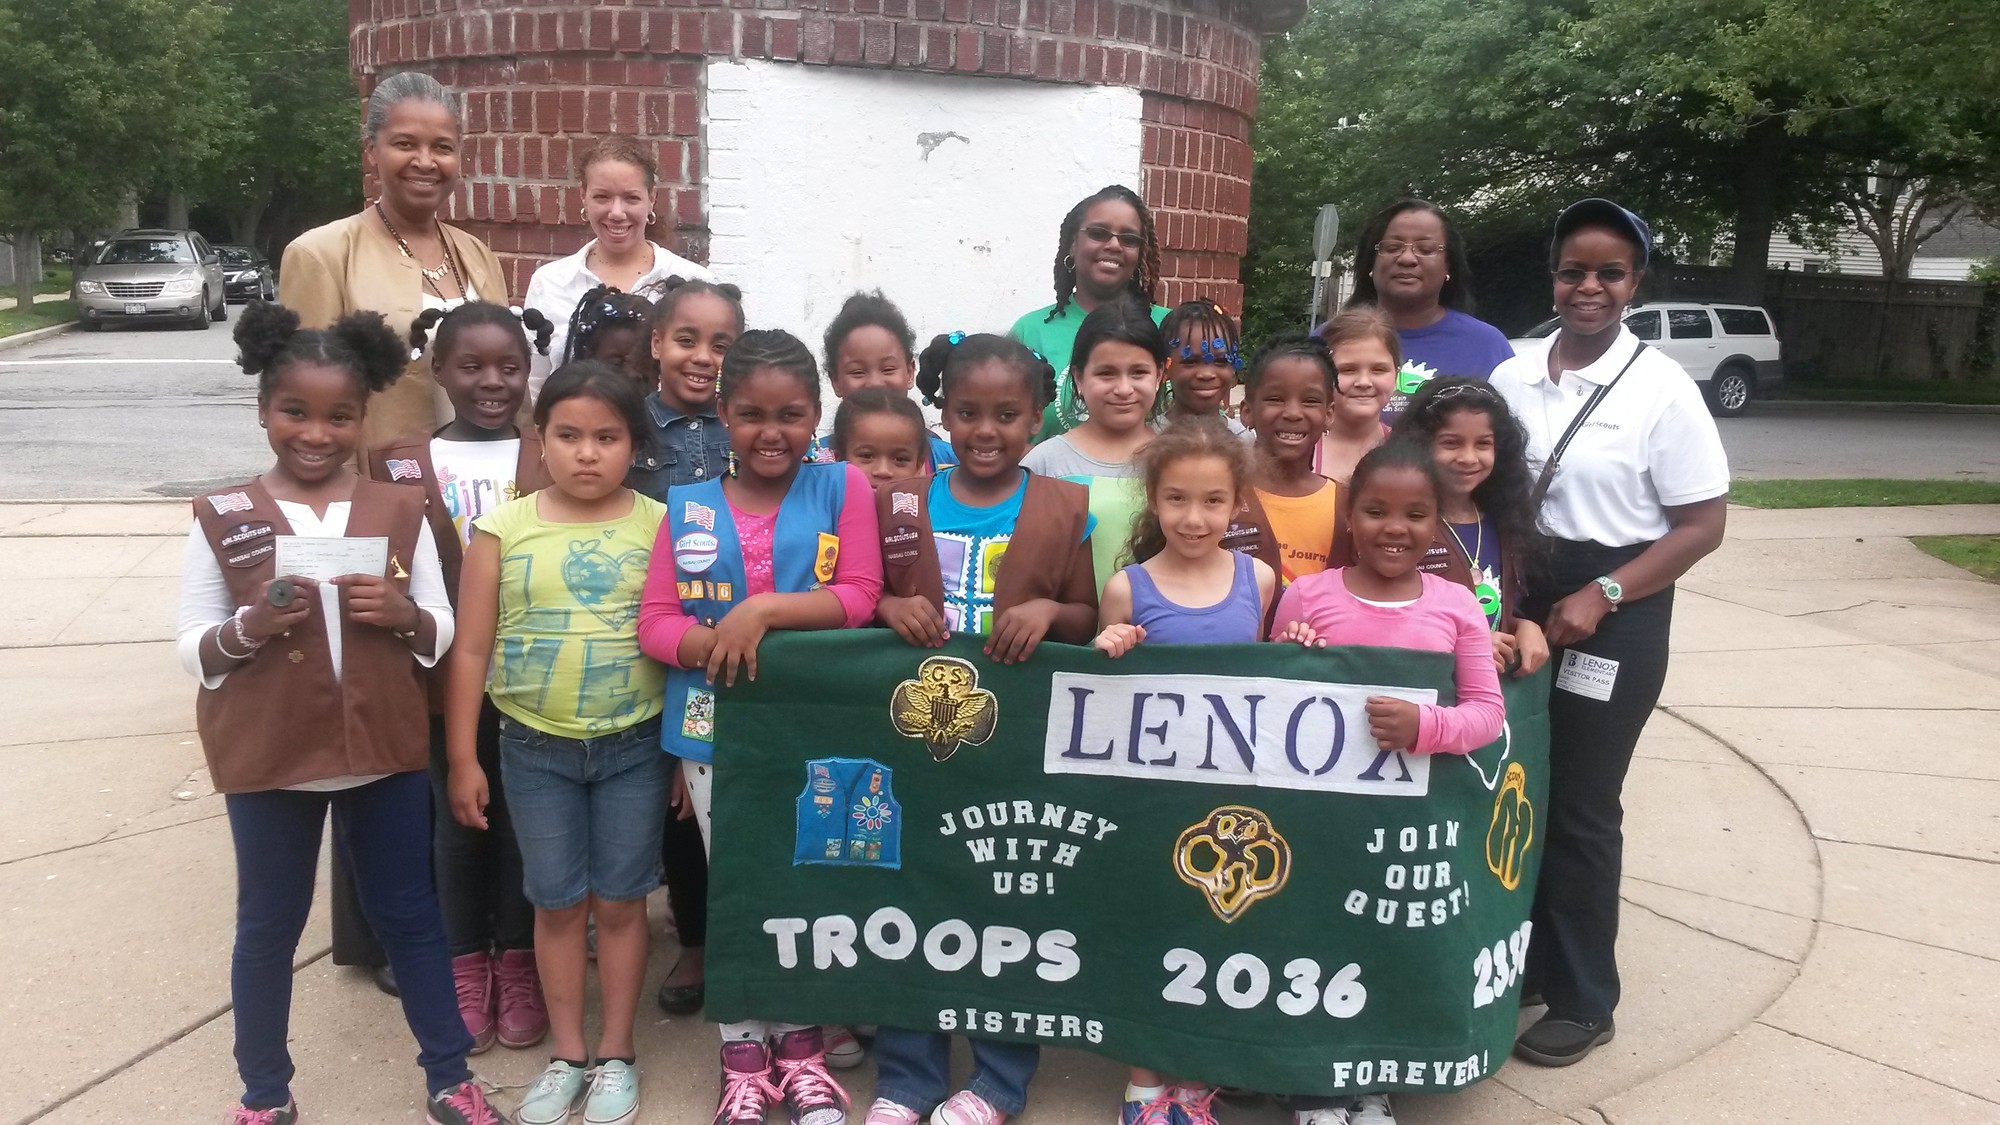 Girl Scout Troop 2036 donated $75 to Troop 2331’s project to brighten up the ticket booth at Lenox Elementary School. Troop 2036 members and leaders posed with Lenox Principal Bernice Acevedo, left, in the spring.